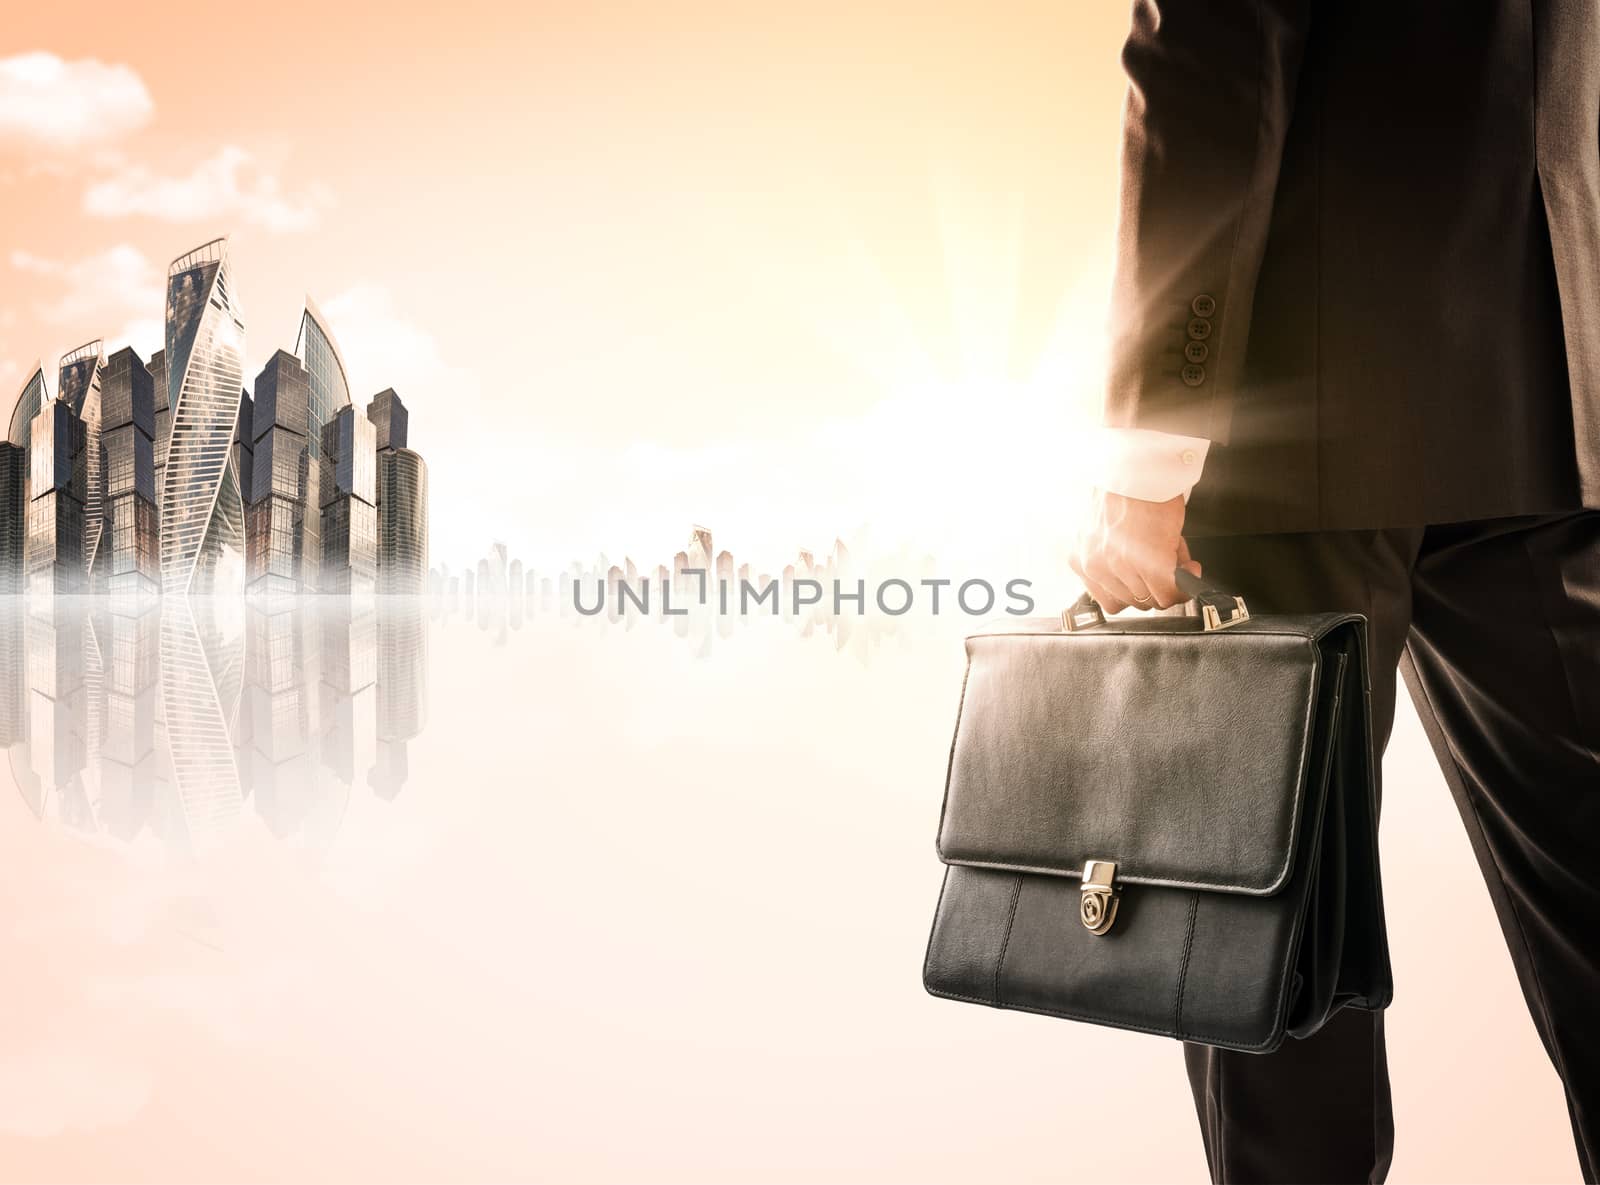 Businessman with suitcase against modern city, rear view